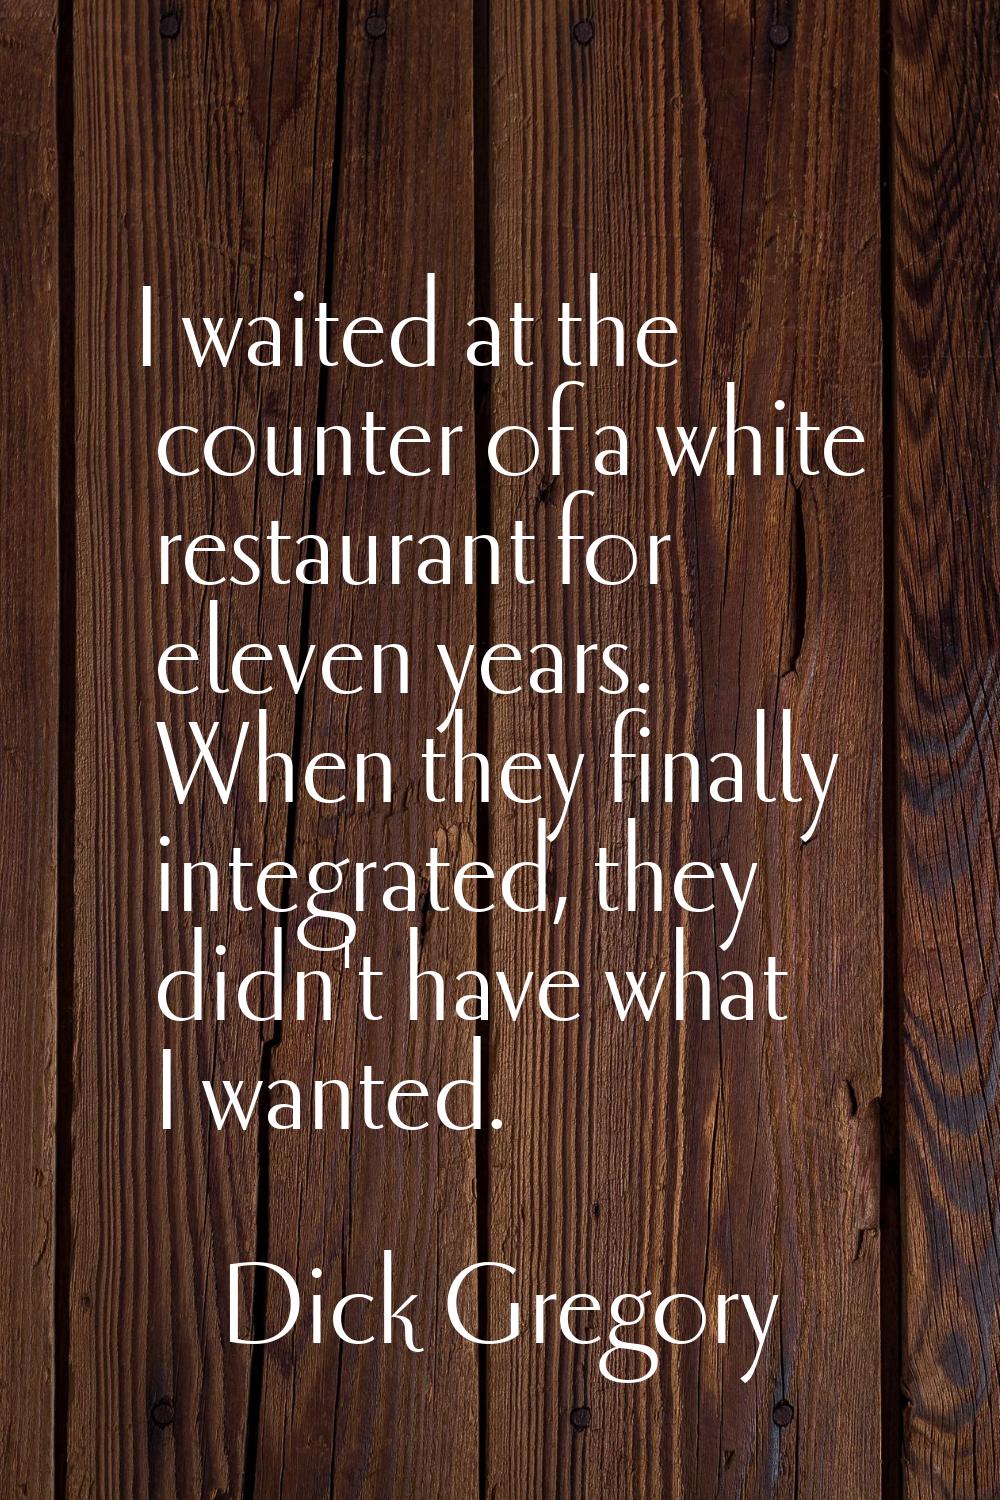 I waited at the counter of a white restaurant for eleven years. When they finally integrated, they 